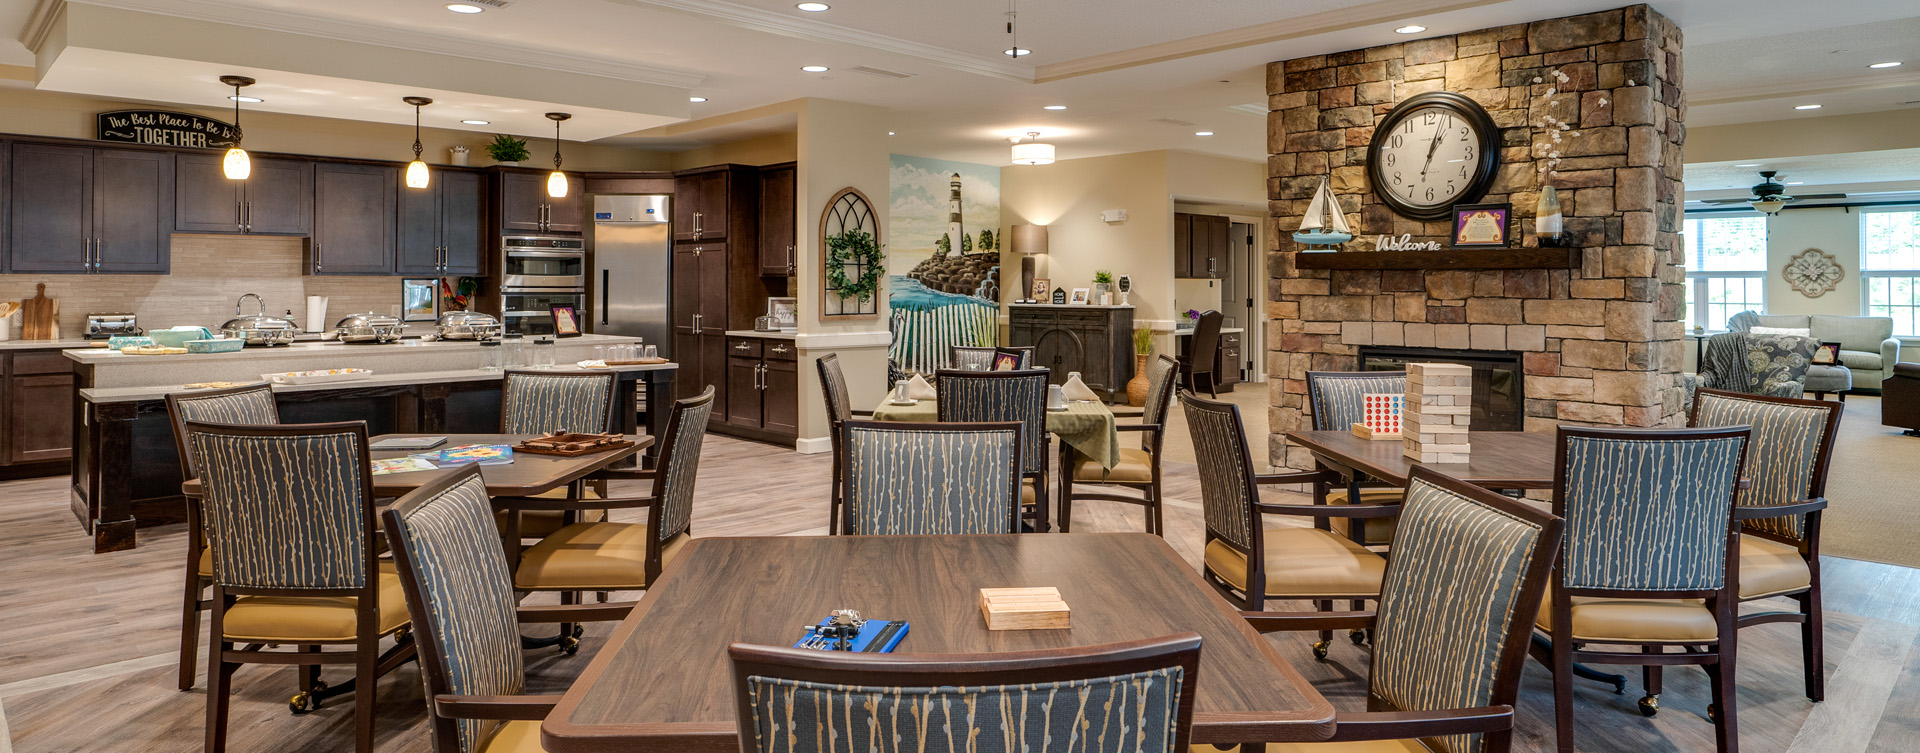 Mary B’s country kitchen evokes a sense of home and reconnects residents to past life skills at Bickford of Chesapeake